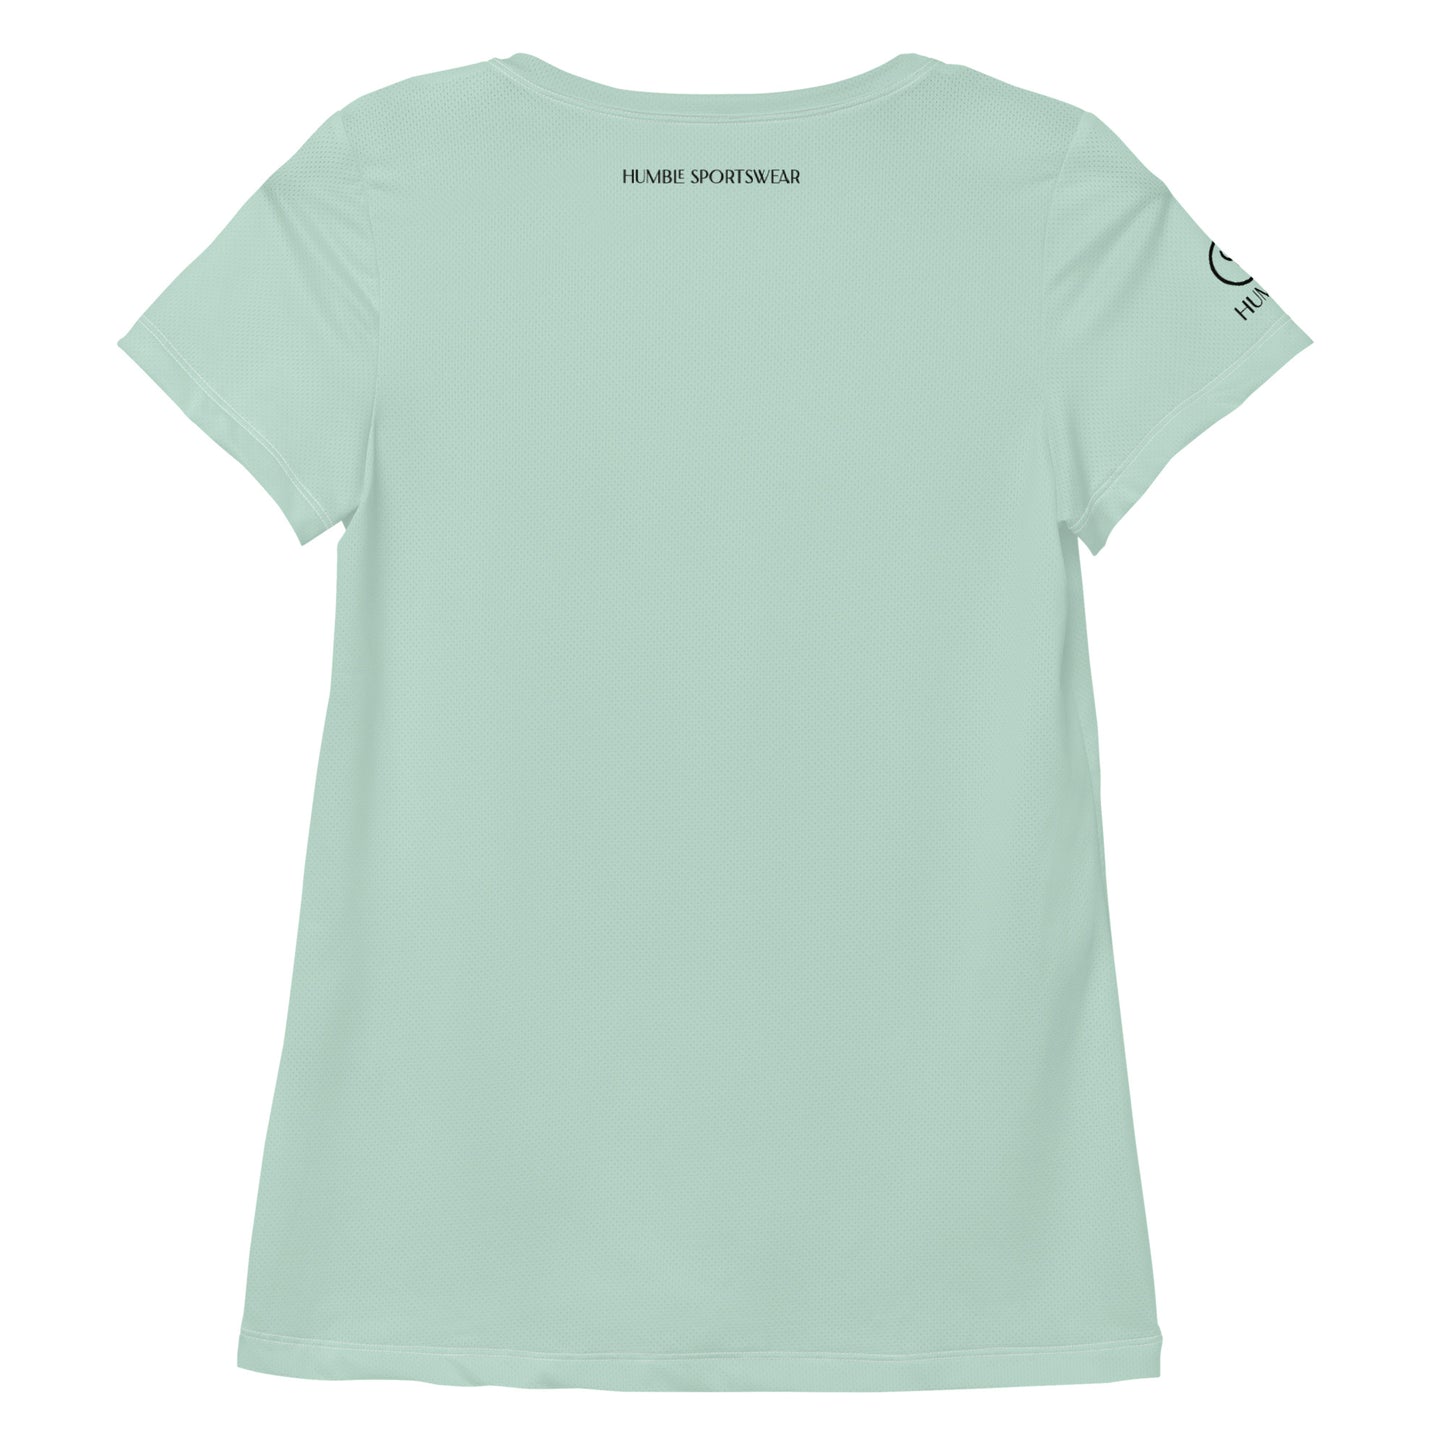 Humble Sportswear, women’s color match tops, workout tops, athletic shirts for women